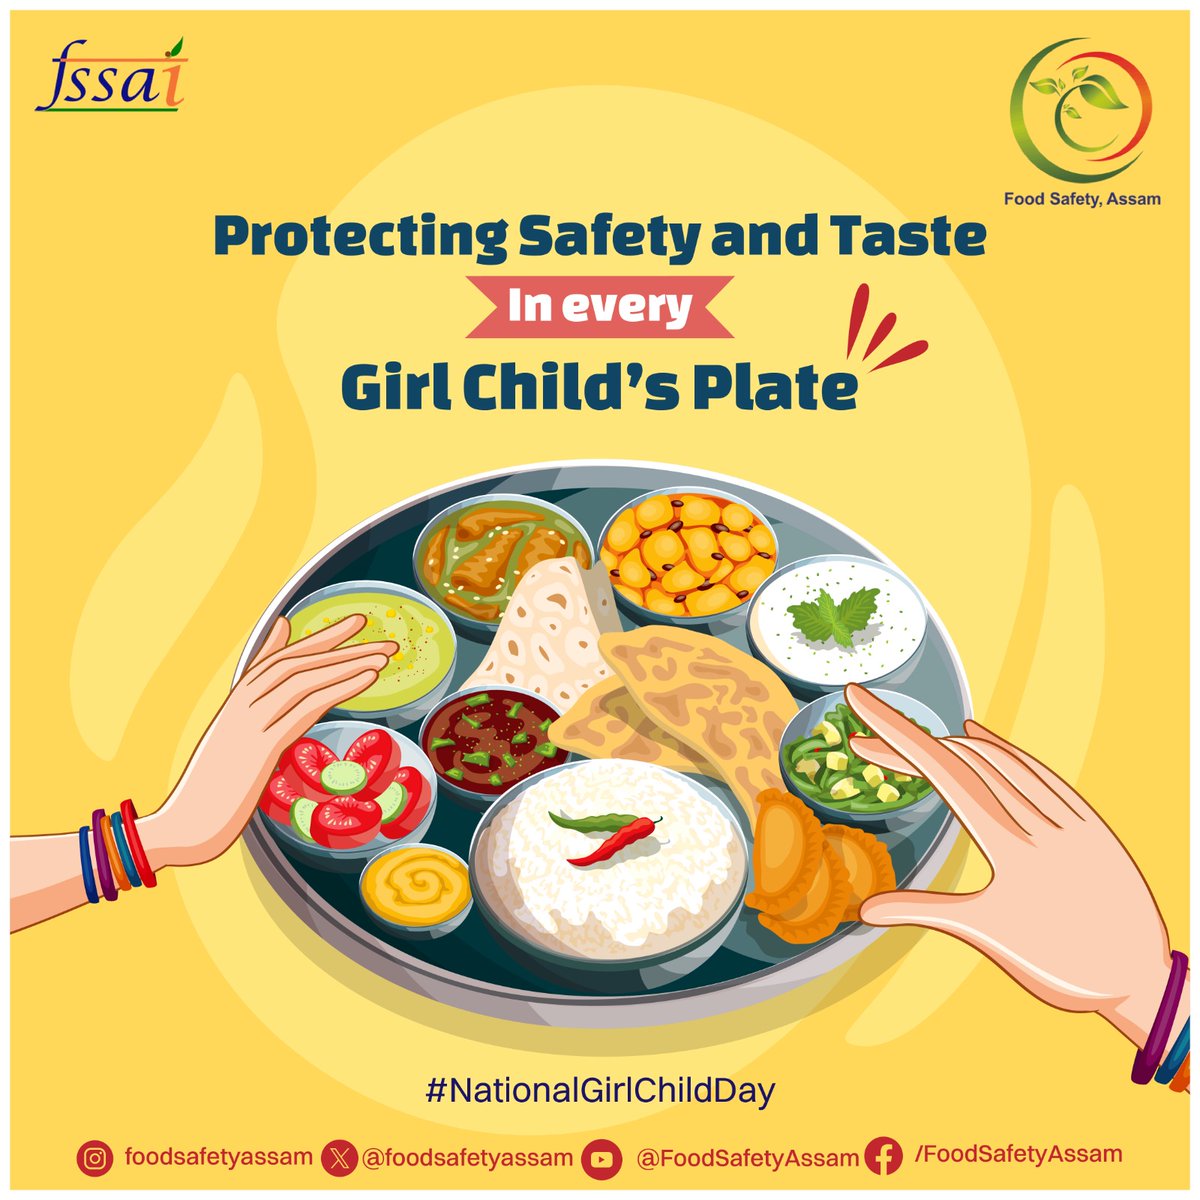 Empowering our girl children for a brighter tomorrow, through a healthy and safe plate of food. 🍛

Happy National Girl Child Day! 👧🏻

#NationalGirlChildDay #EmpowerHer #GirlPower #FoodSafetyAssam #FSSAI #foodawareness #foodsafetyfirst #foodtesting